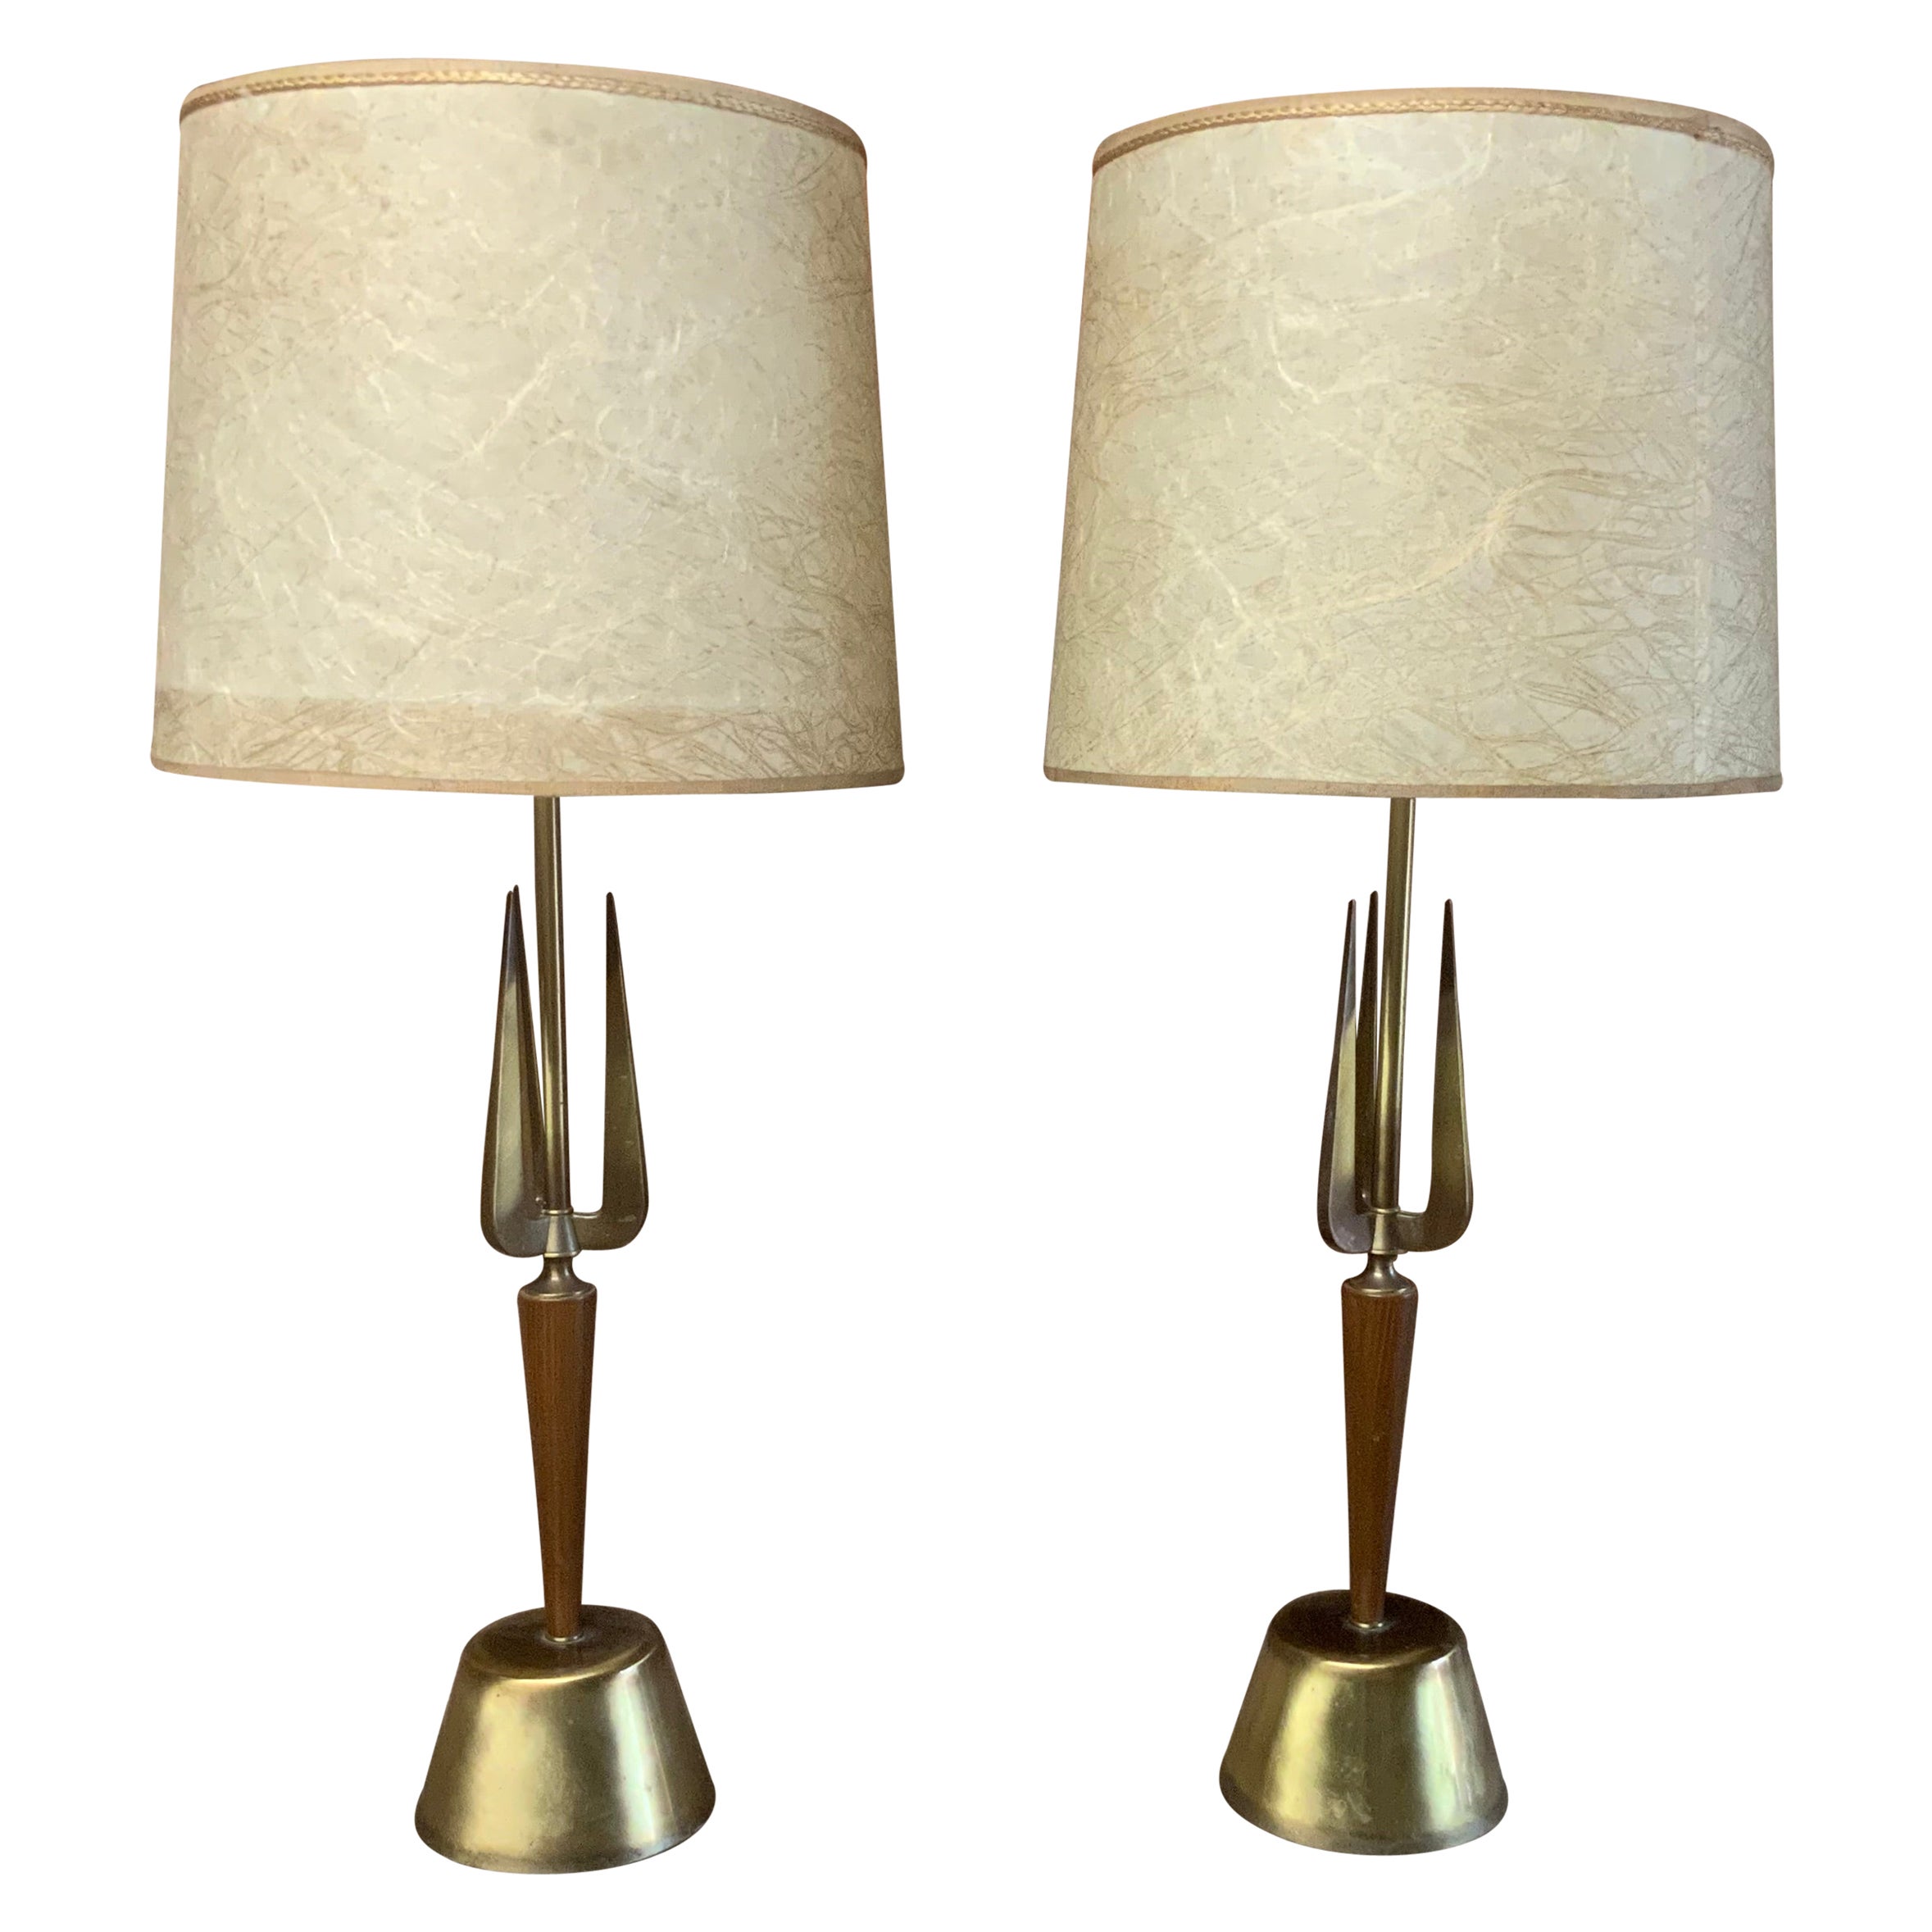 Rembrandt Mid-Century Modern Triton Table Lamps, A Pair